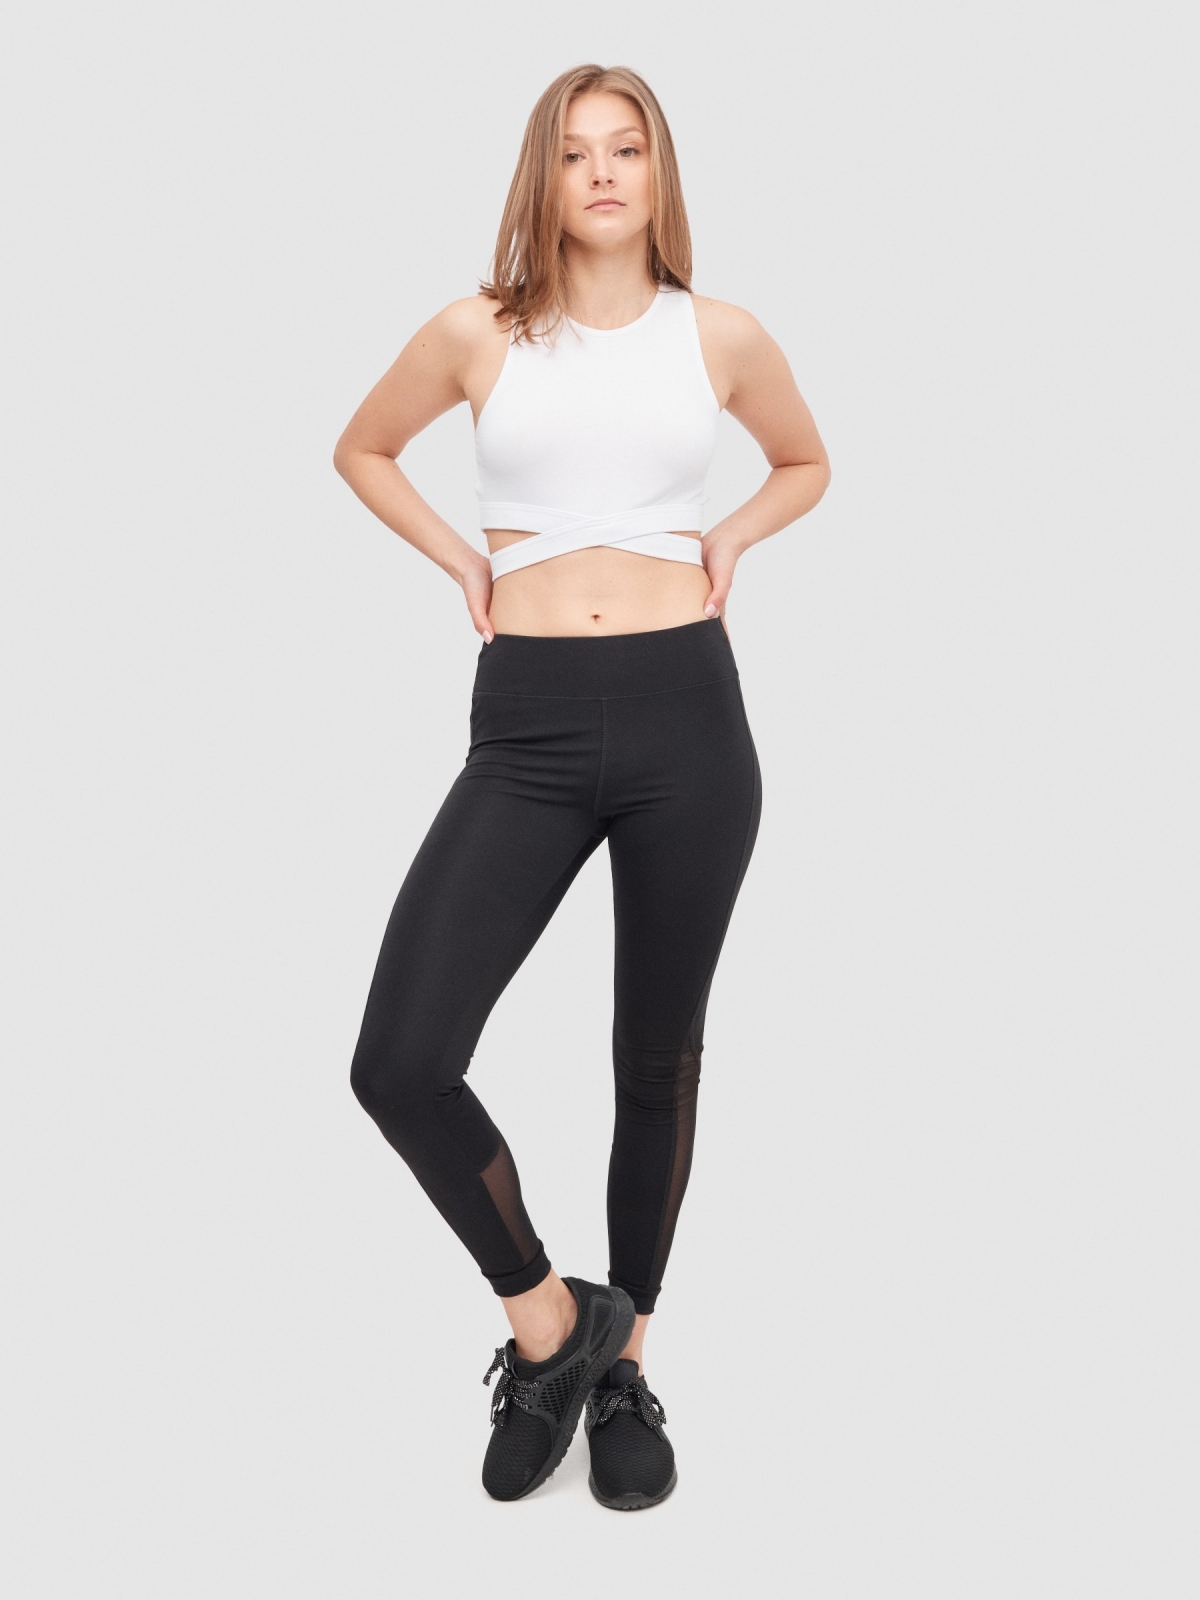 Leggings with mesh parts black front view